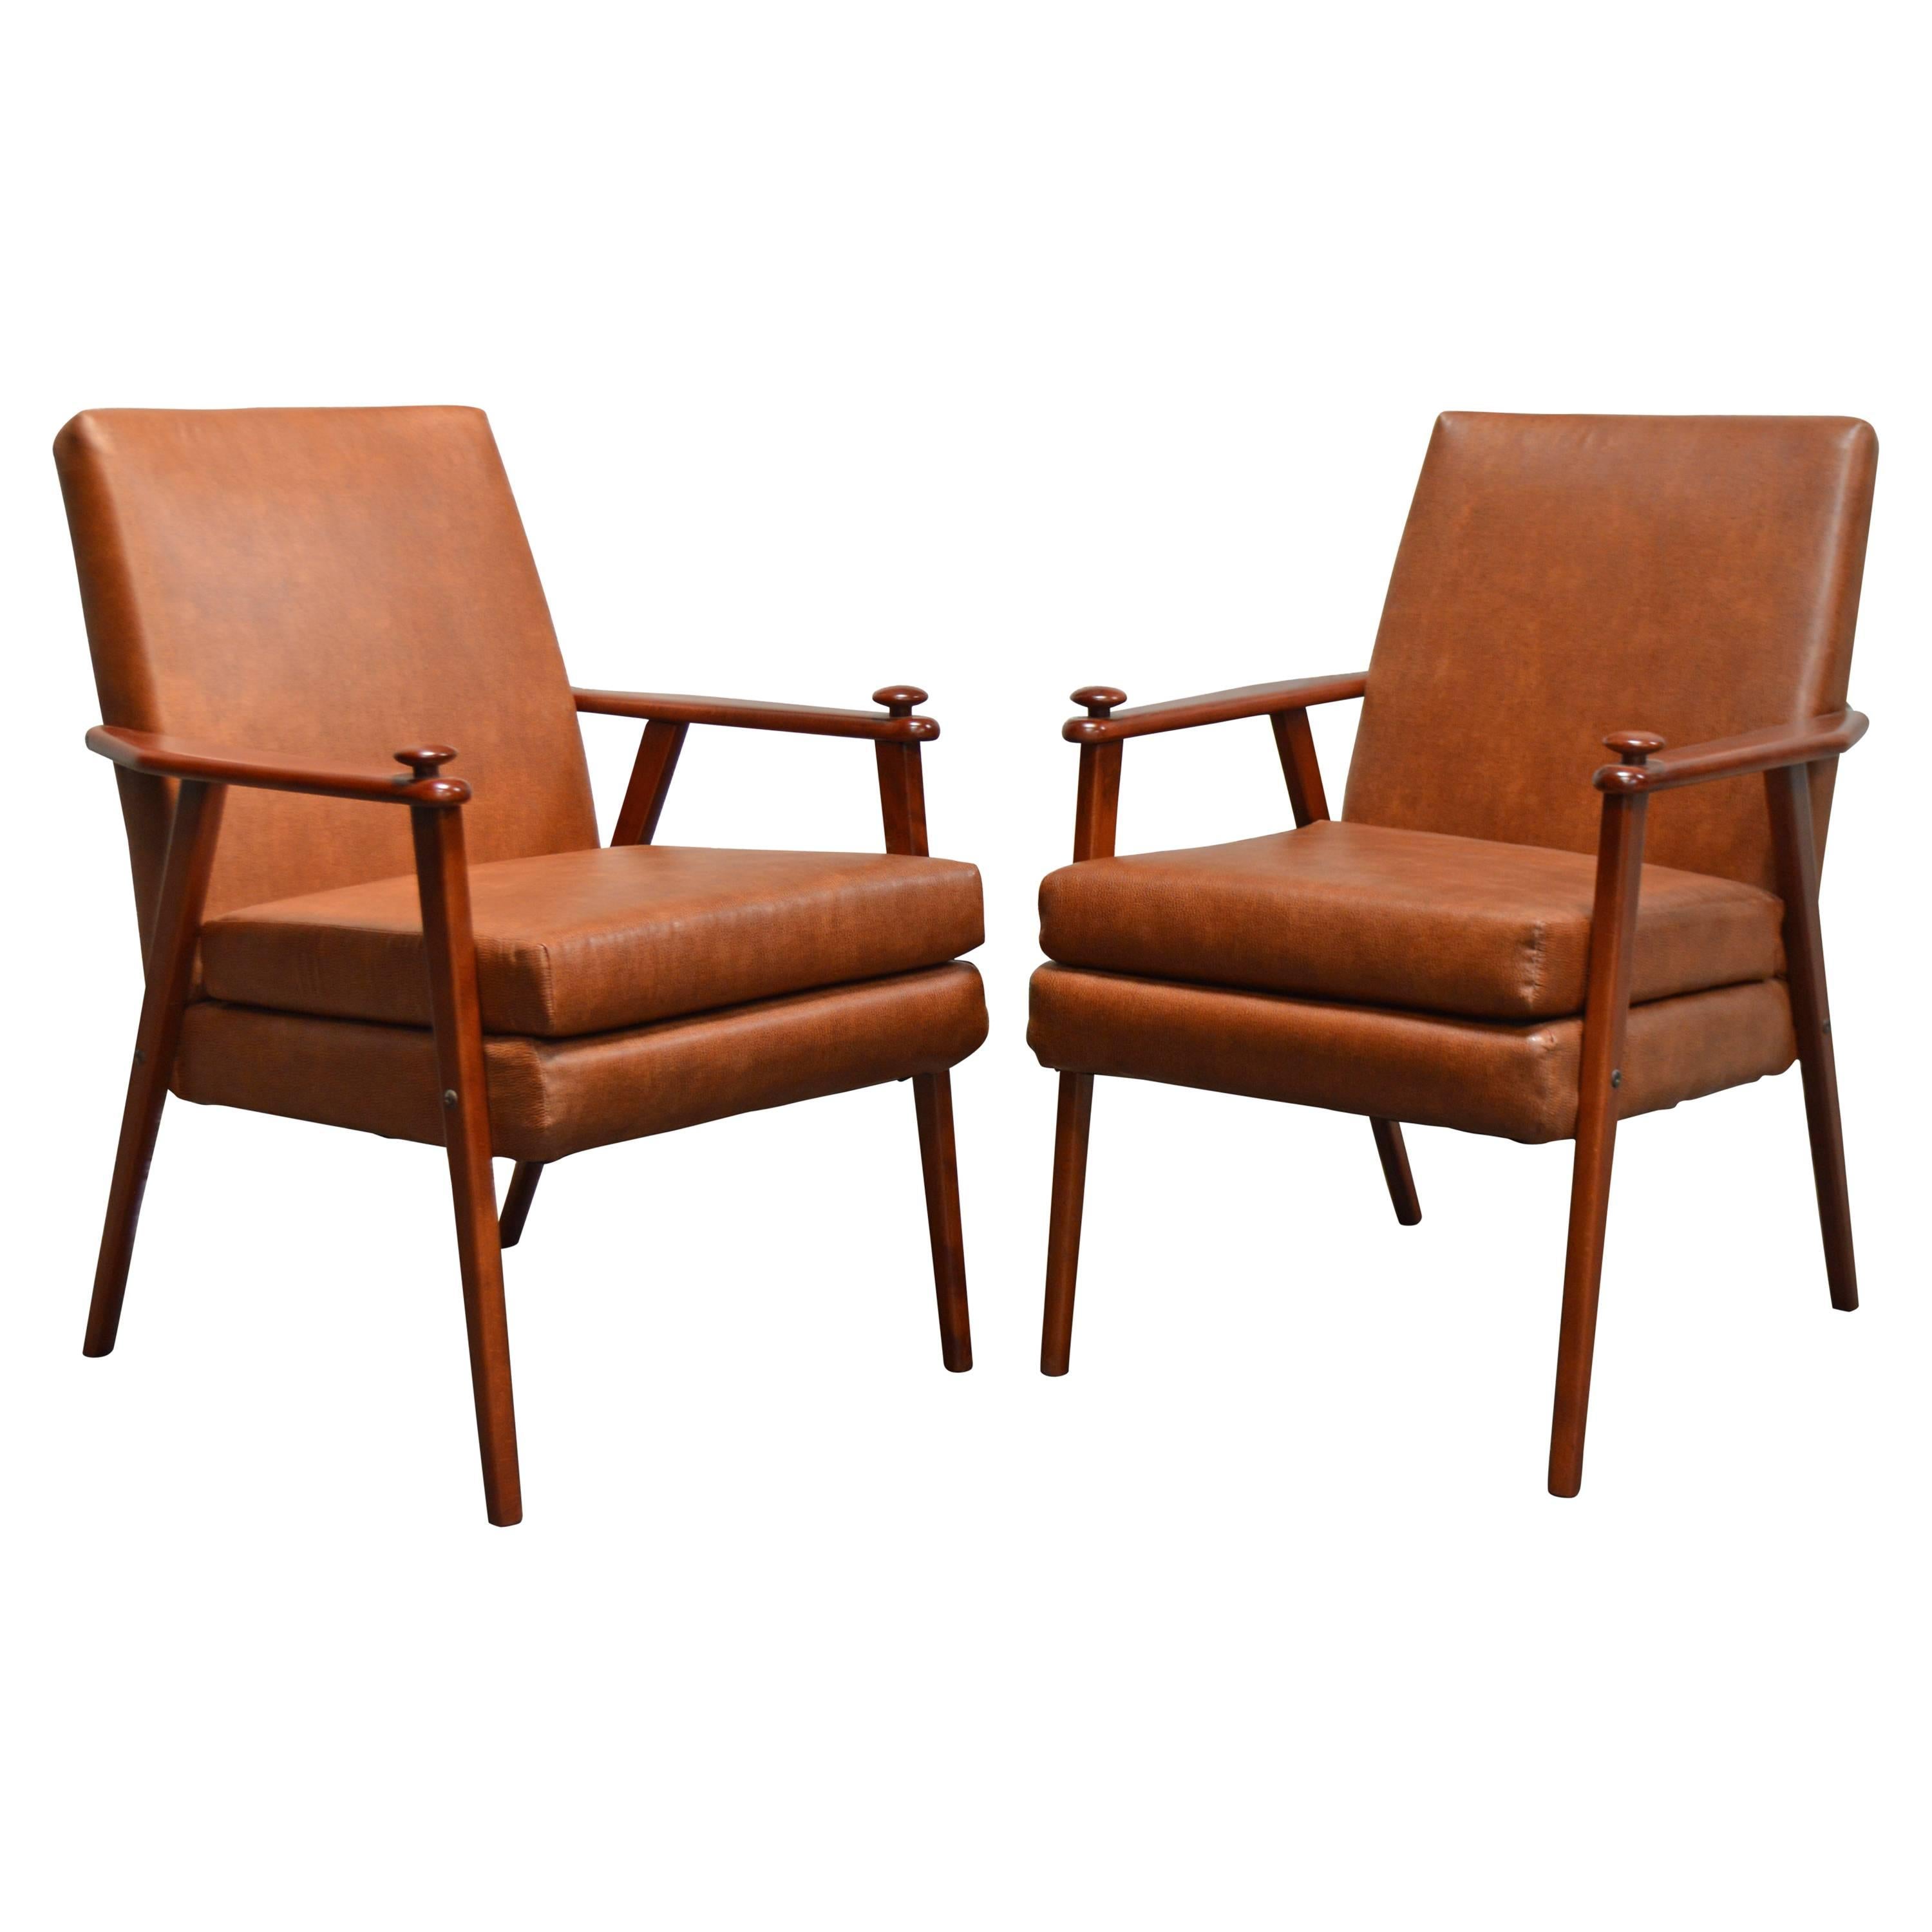 Pair of Mid-Century Modern Side Chairs